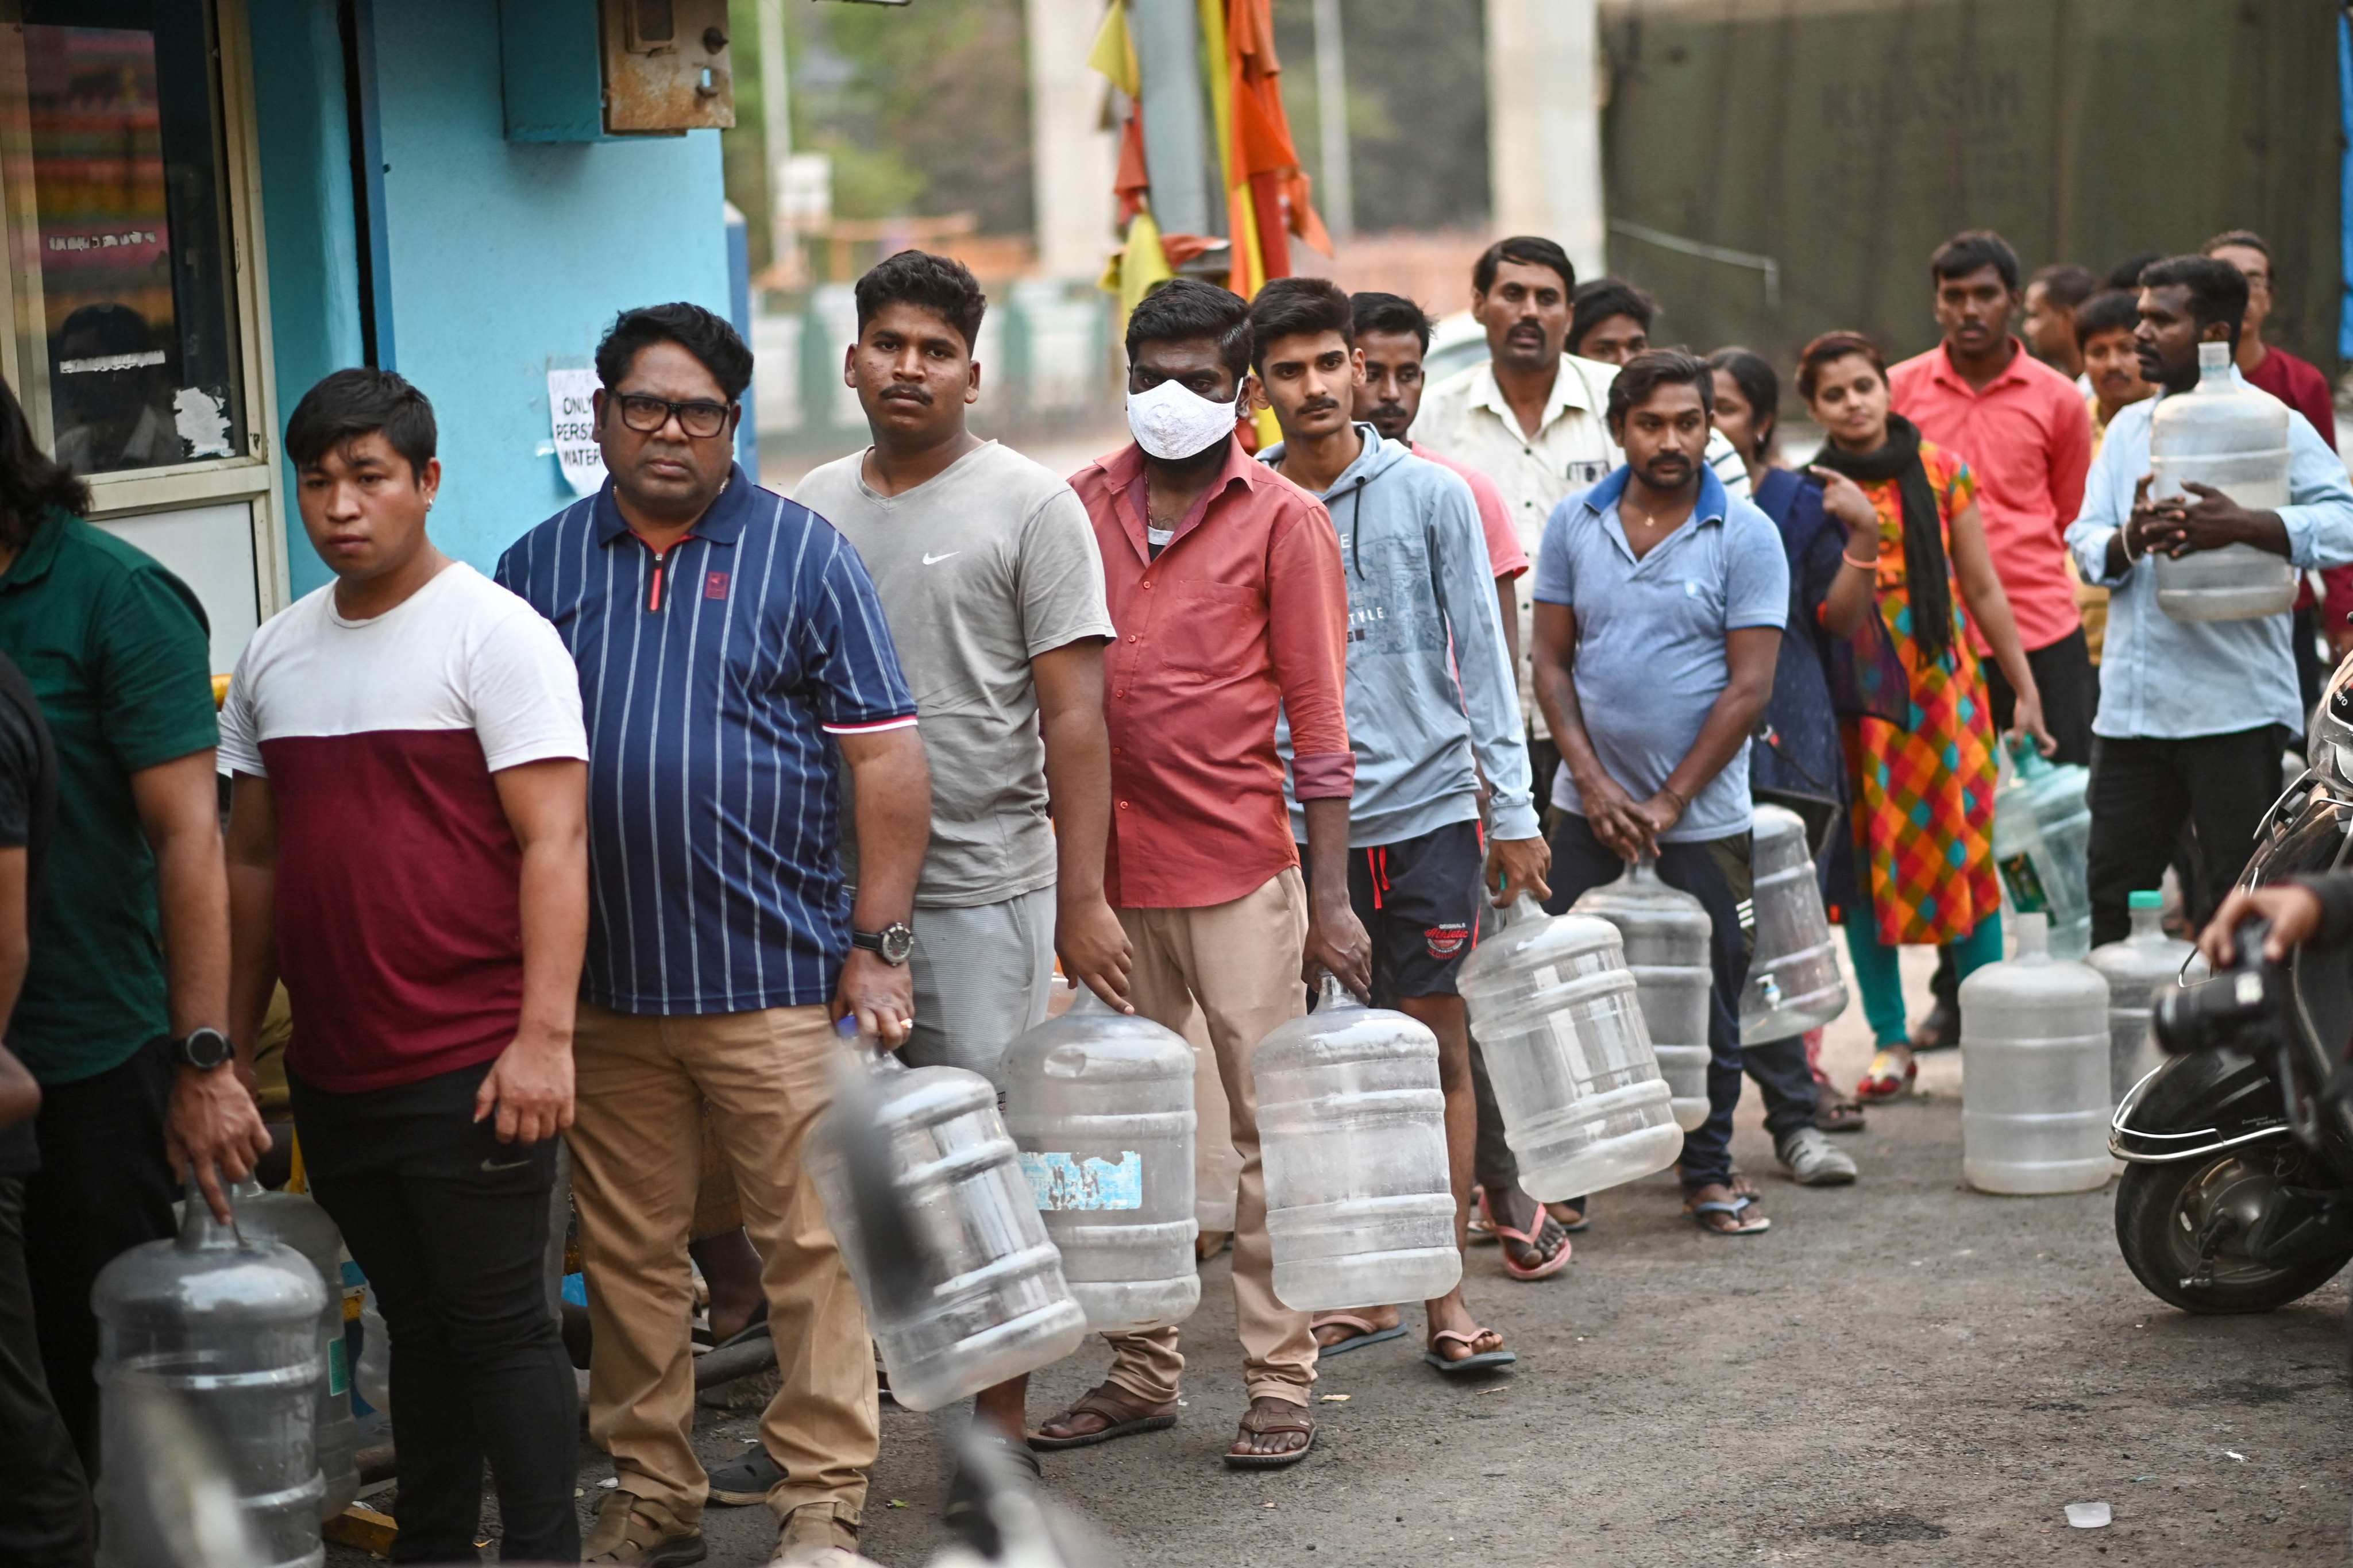 Residents of Bengaluru queue to collect drinking water on Thursday amid the city’s ongoing water crisis. Photo: AFP